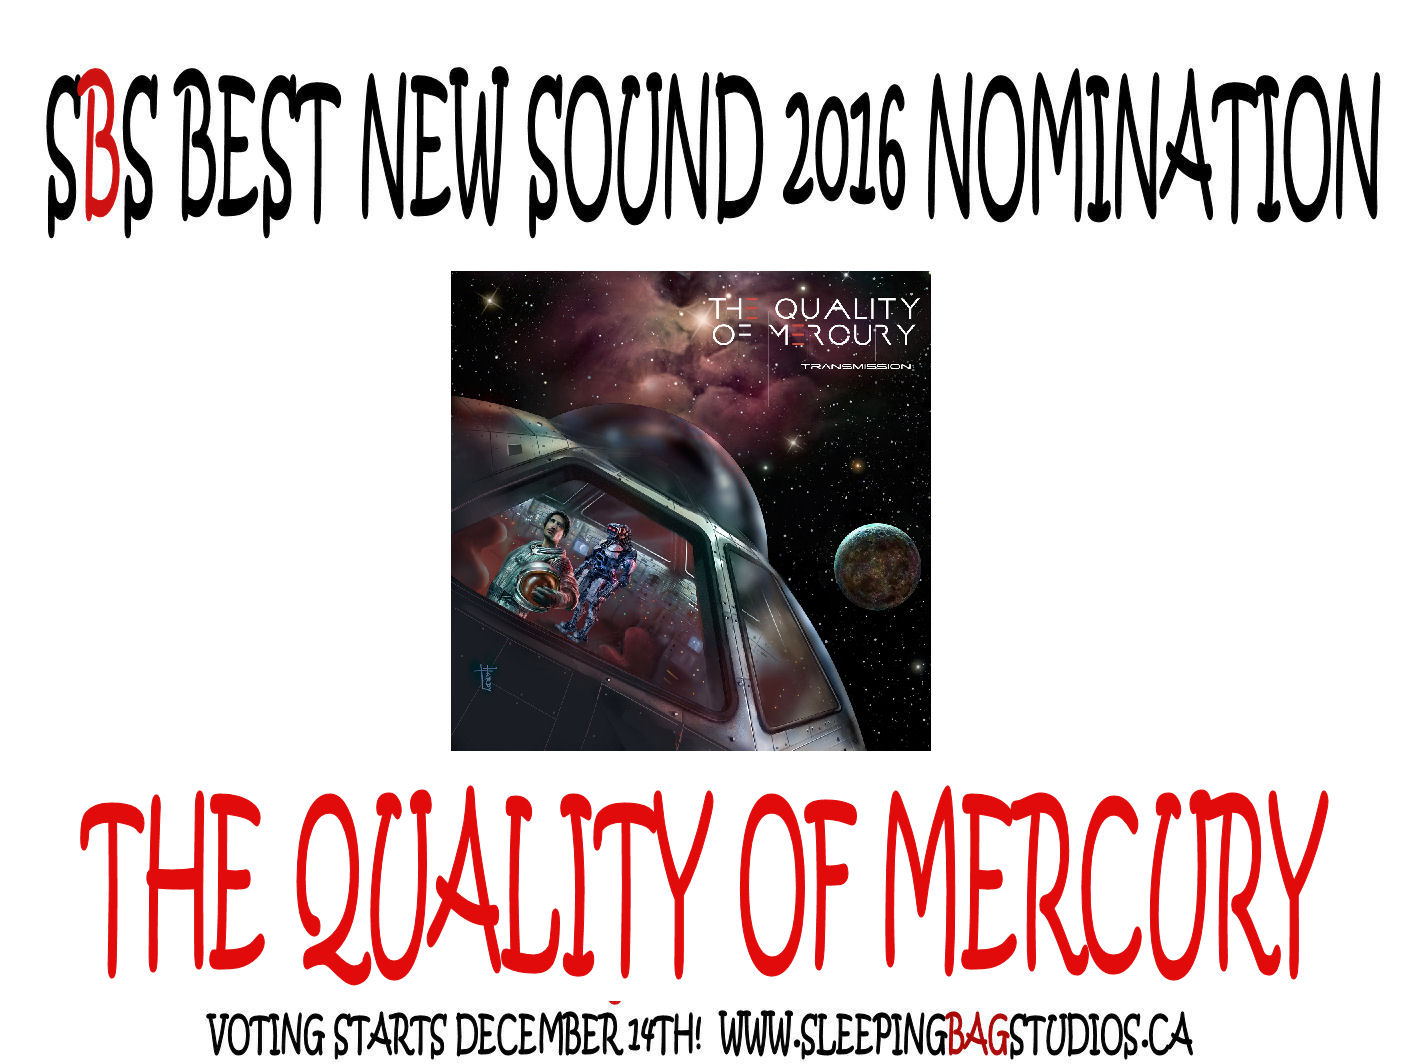  Best New Sound 2016 Nomination:  The Quality Of Mercury